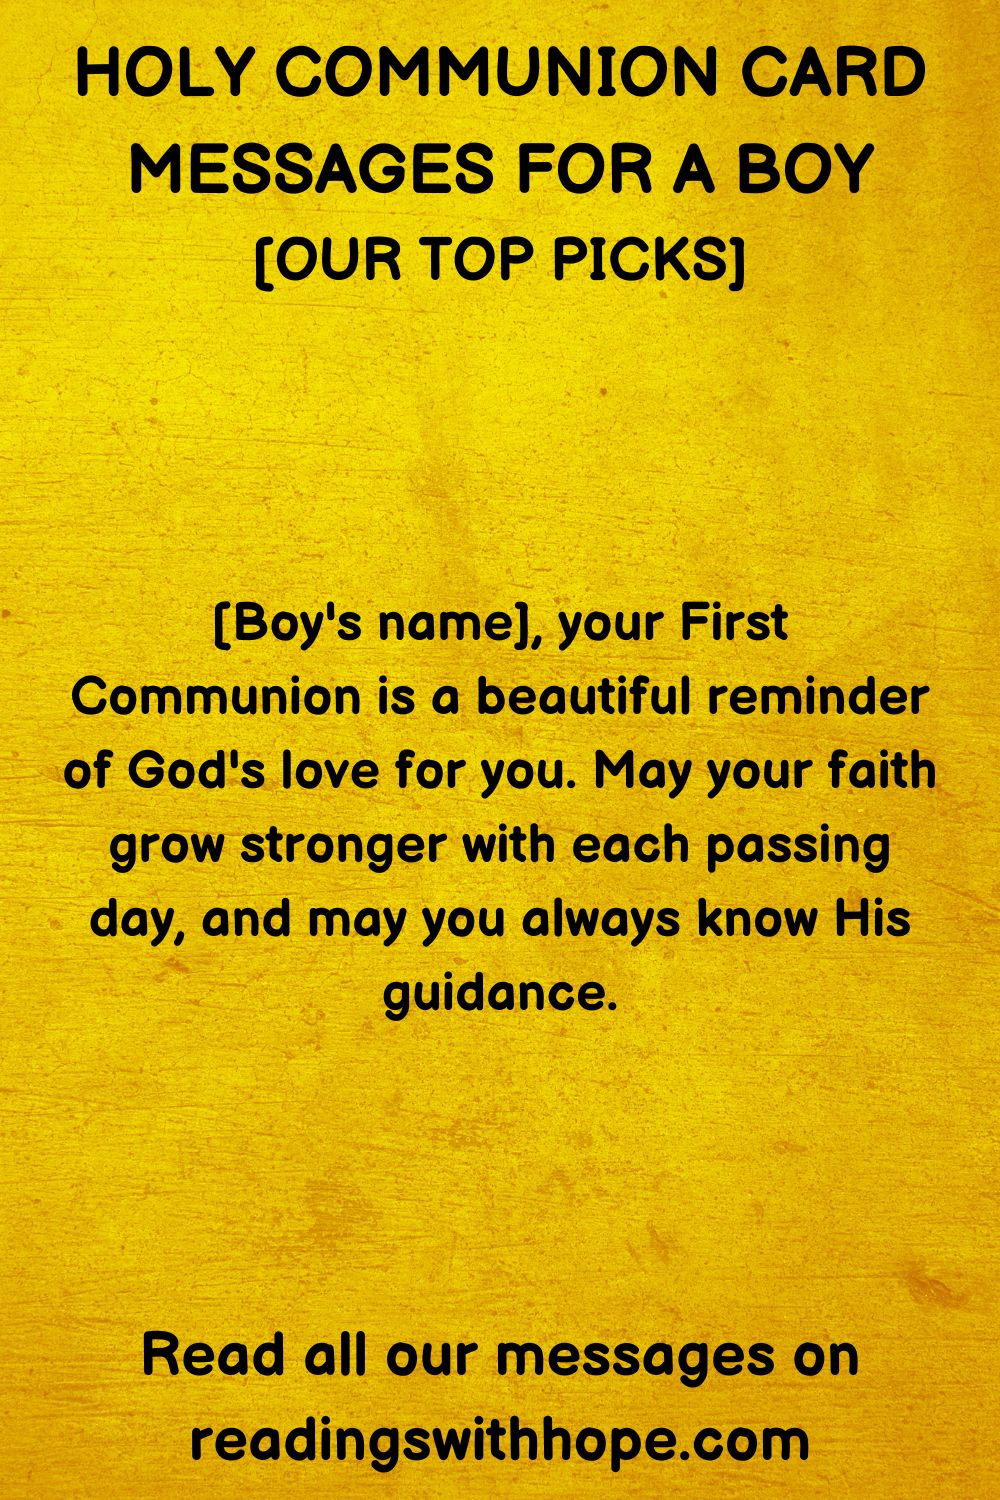 Holy Communion Card Messages for a Boy